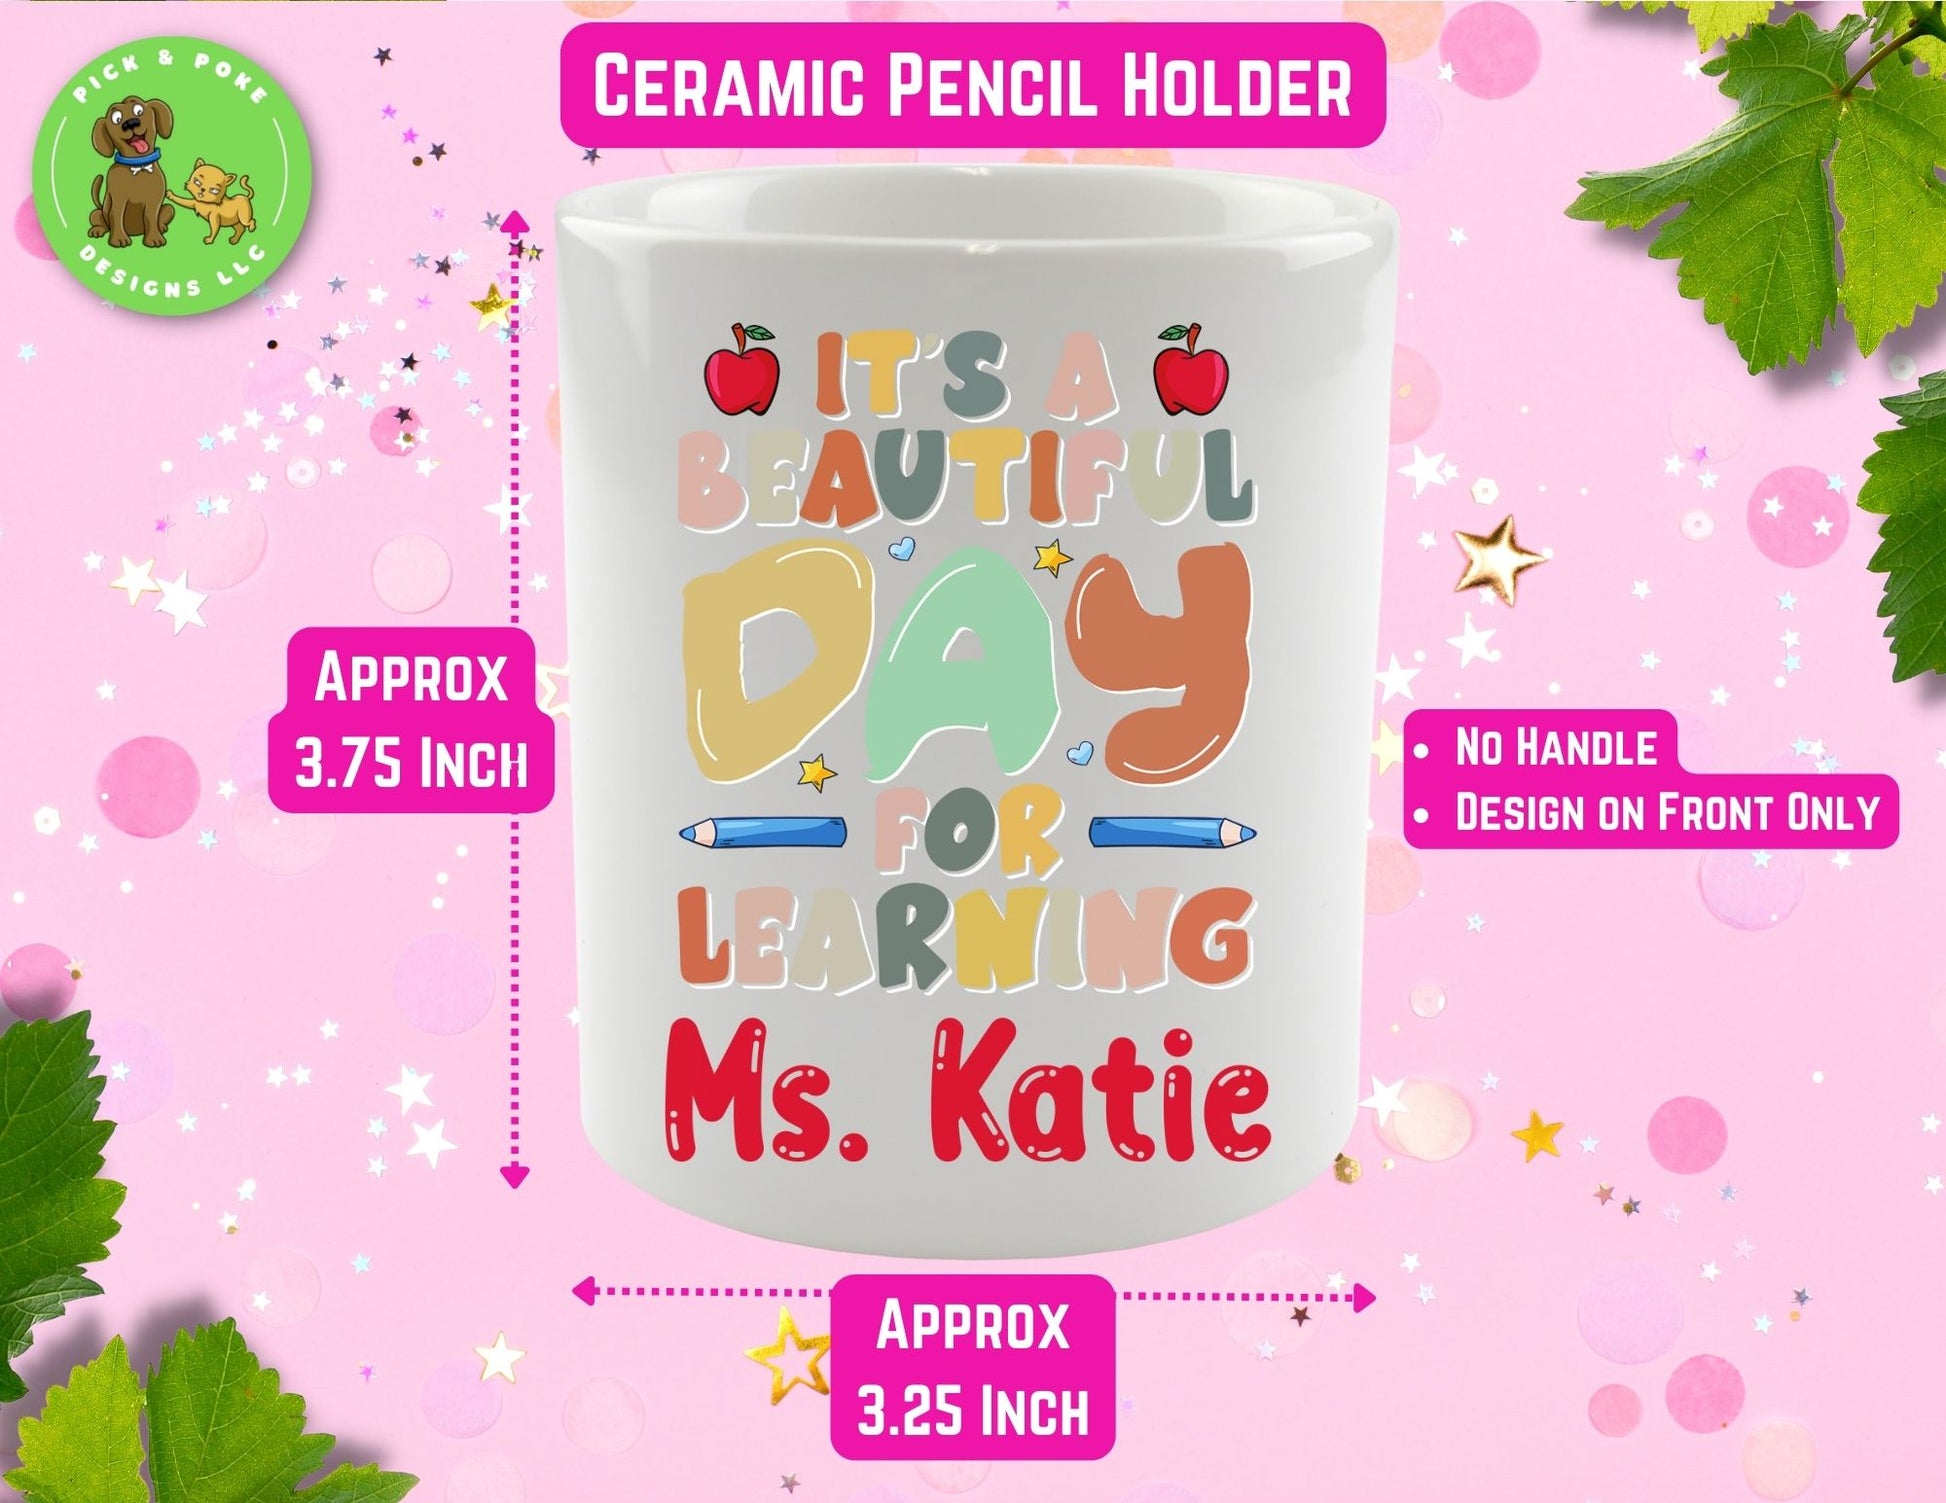 The "It's a beautiful day for learning" quote and teacher name is printed on the front of the holder only and there is no handle. 